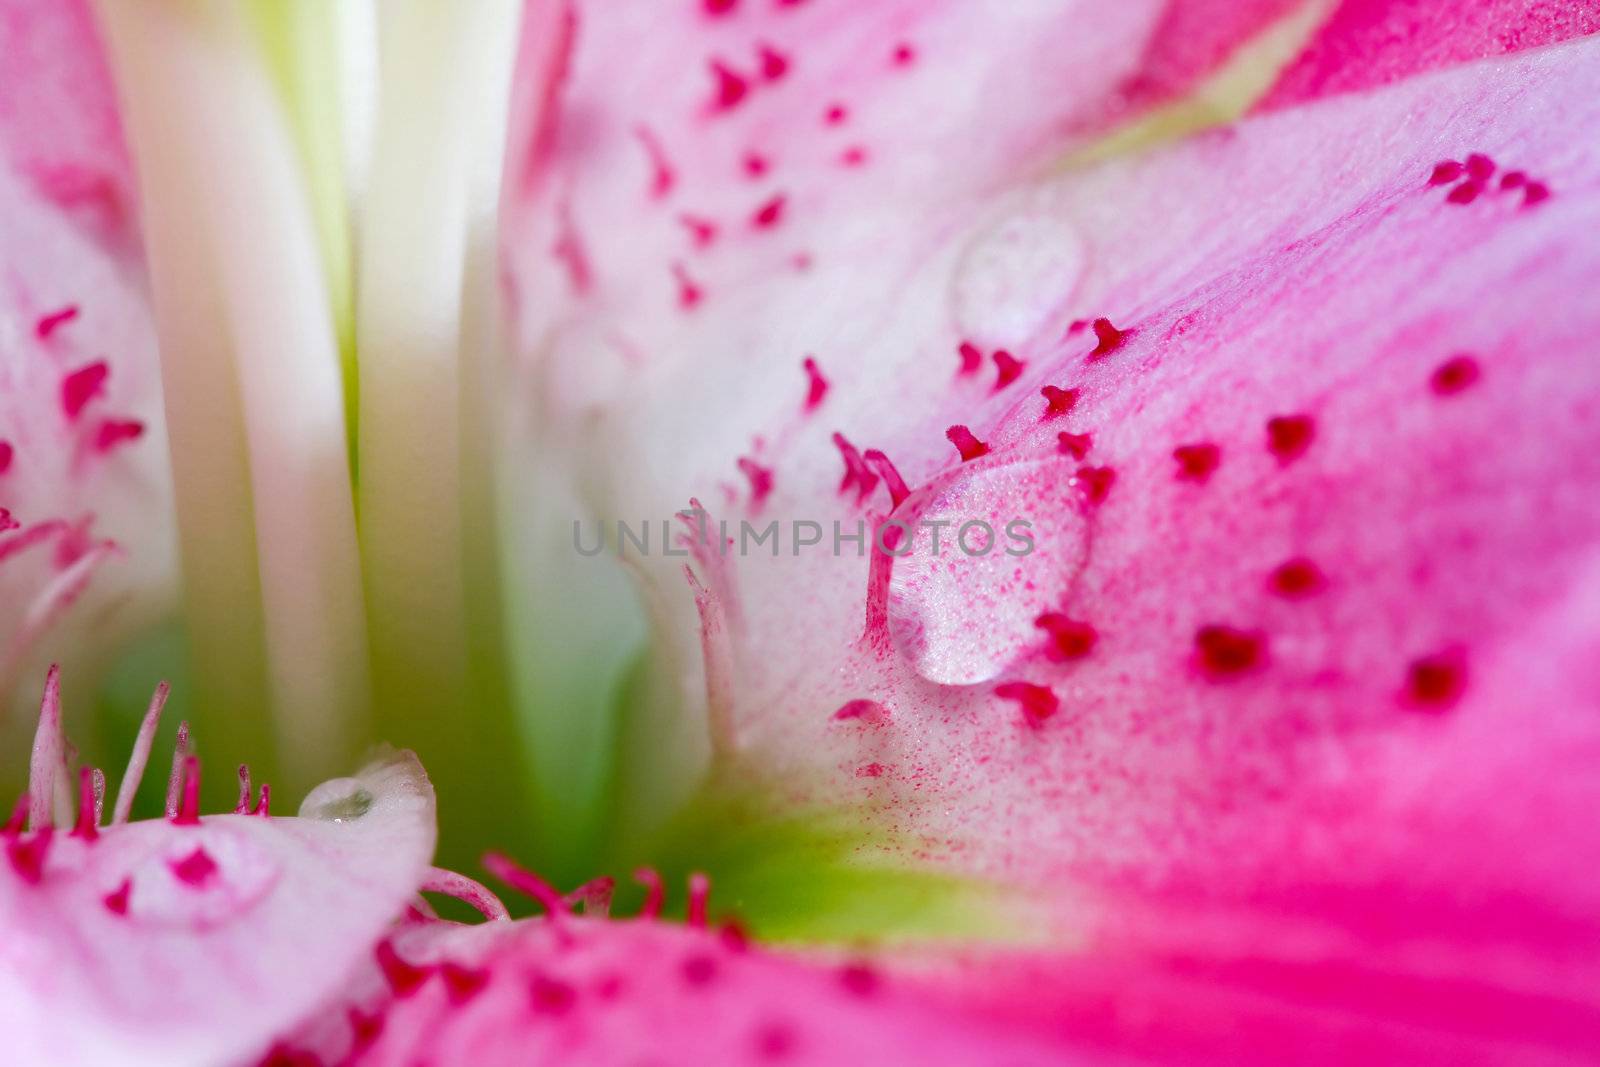 Abstract background of flower: image of petal closeup with water drop